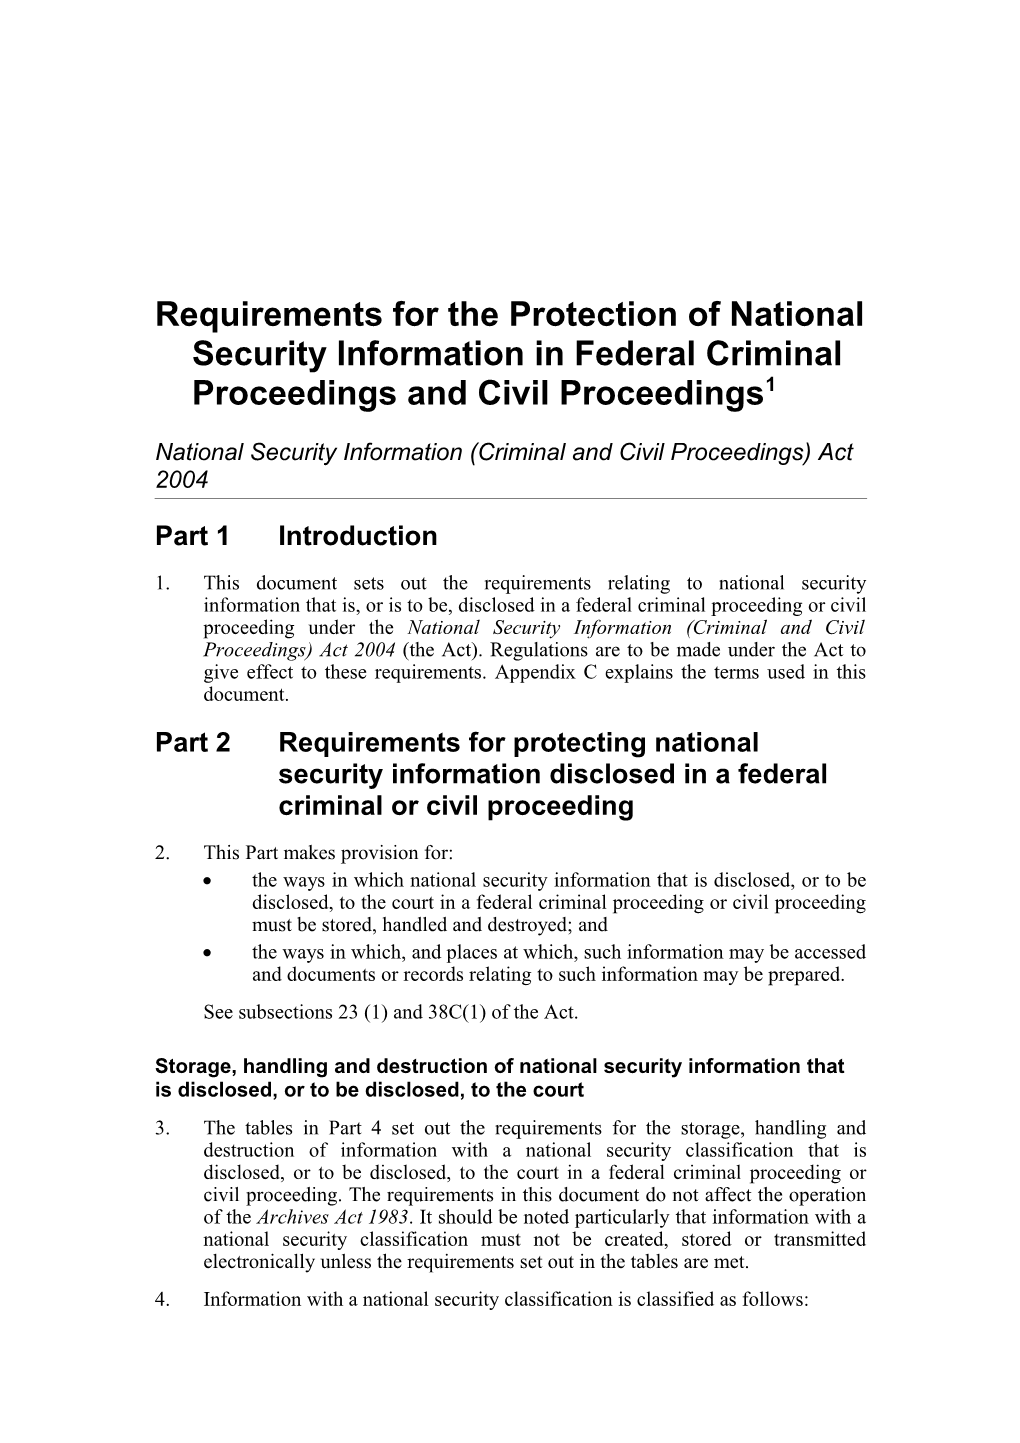 Requirements for the Protection of National Security Information in Federal Criminalproceedings